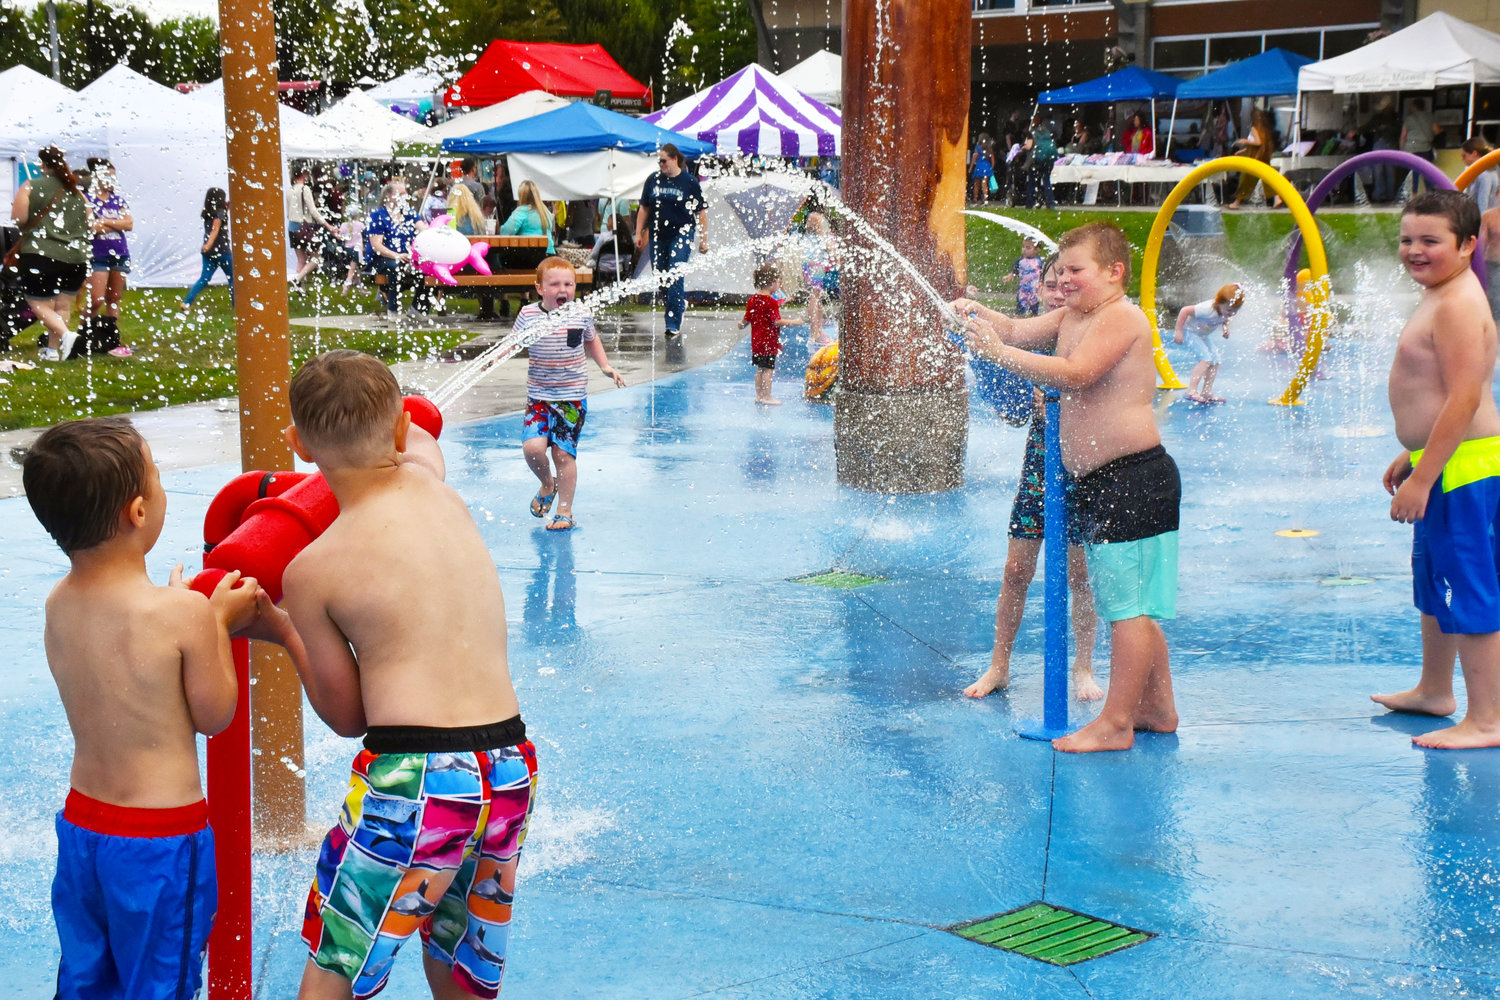 Kids take on a water-gun war to save the Mermaid Kingdom at Yelm Mermaid Festival on Saturday, July 17, at Yelm City Park.